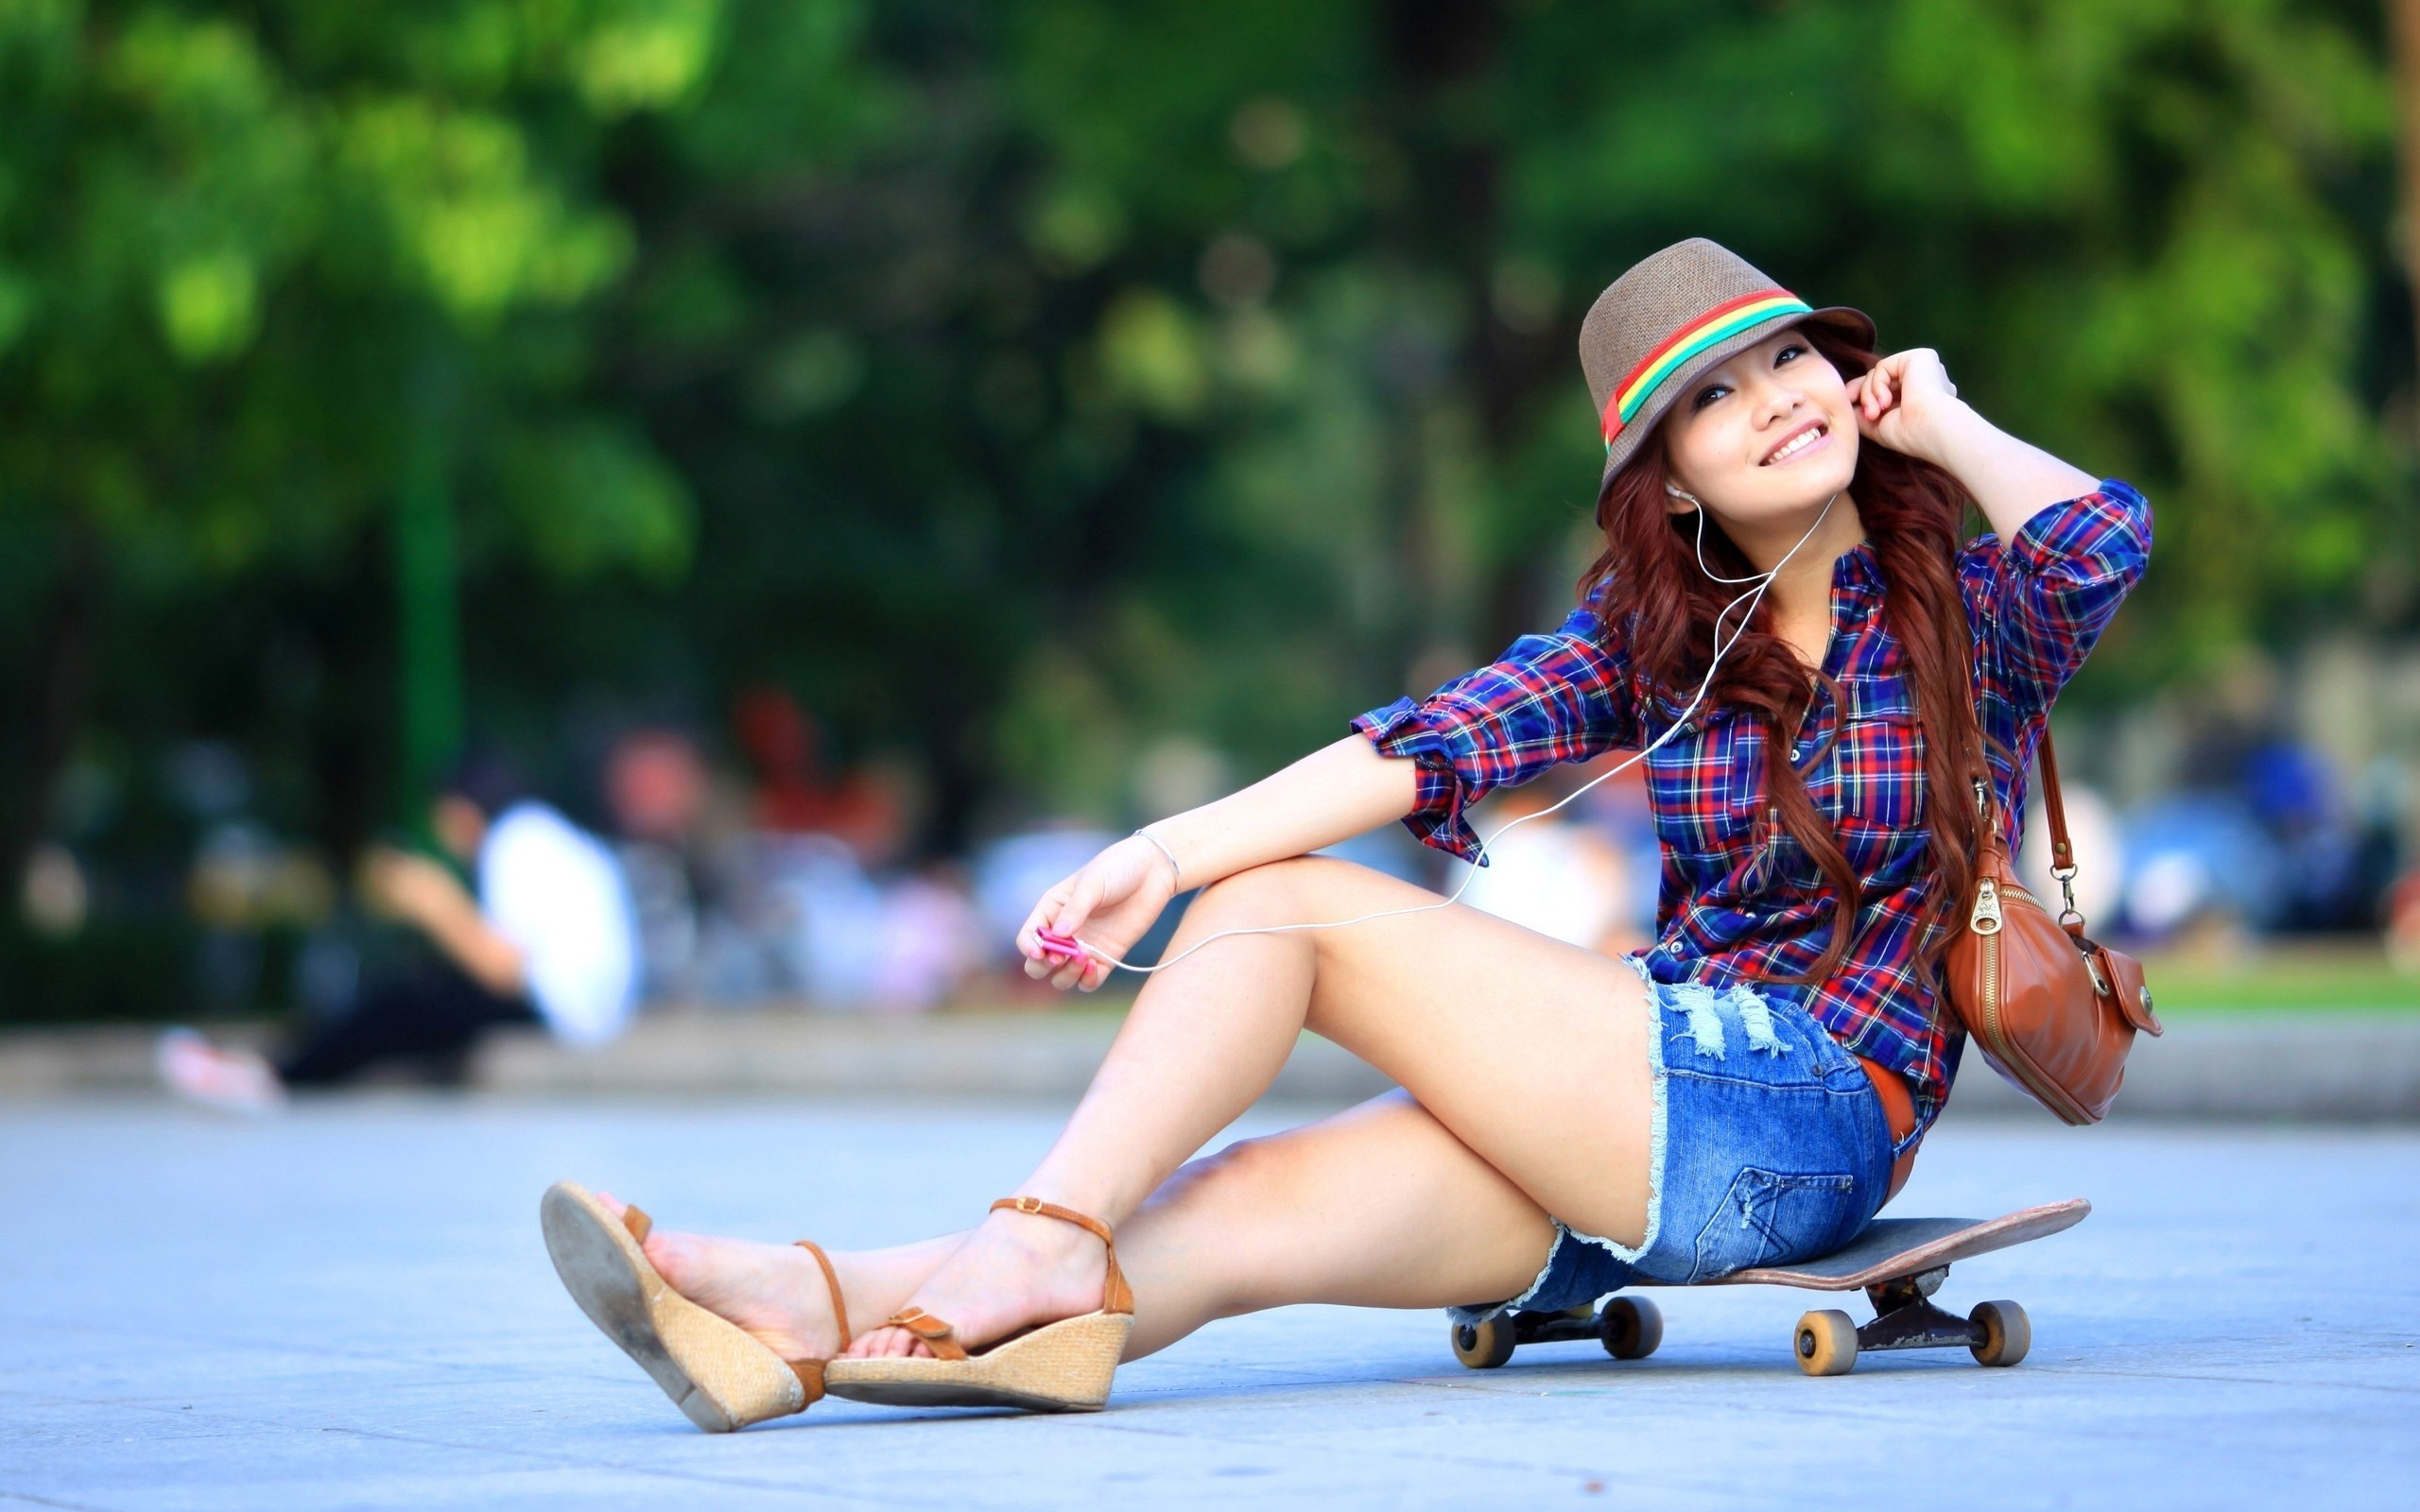 People 2560x1600 women jean shorts shorts hat skateboard shirt sitting looking at viewer earphones Asian smiling sandals legs urban women with hats wedge shoes plaid shirt dyed hair handbags